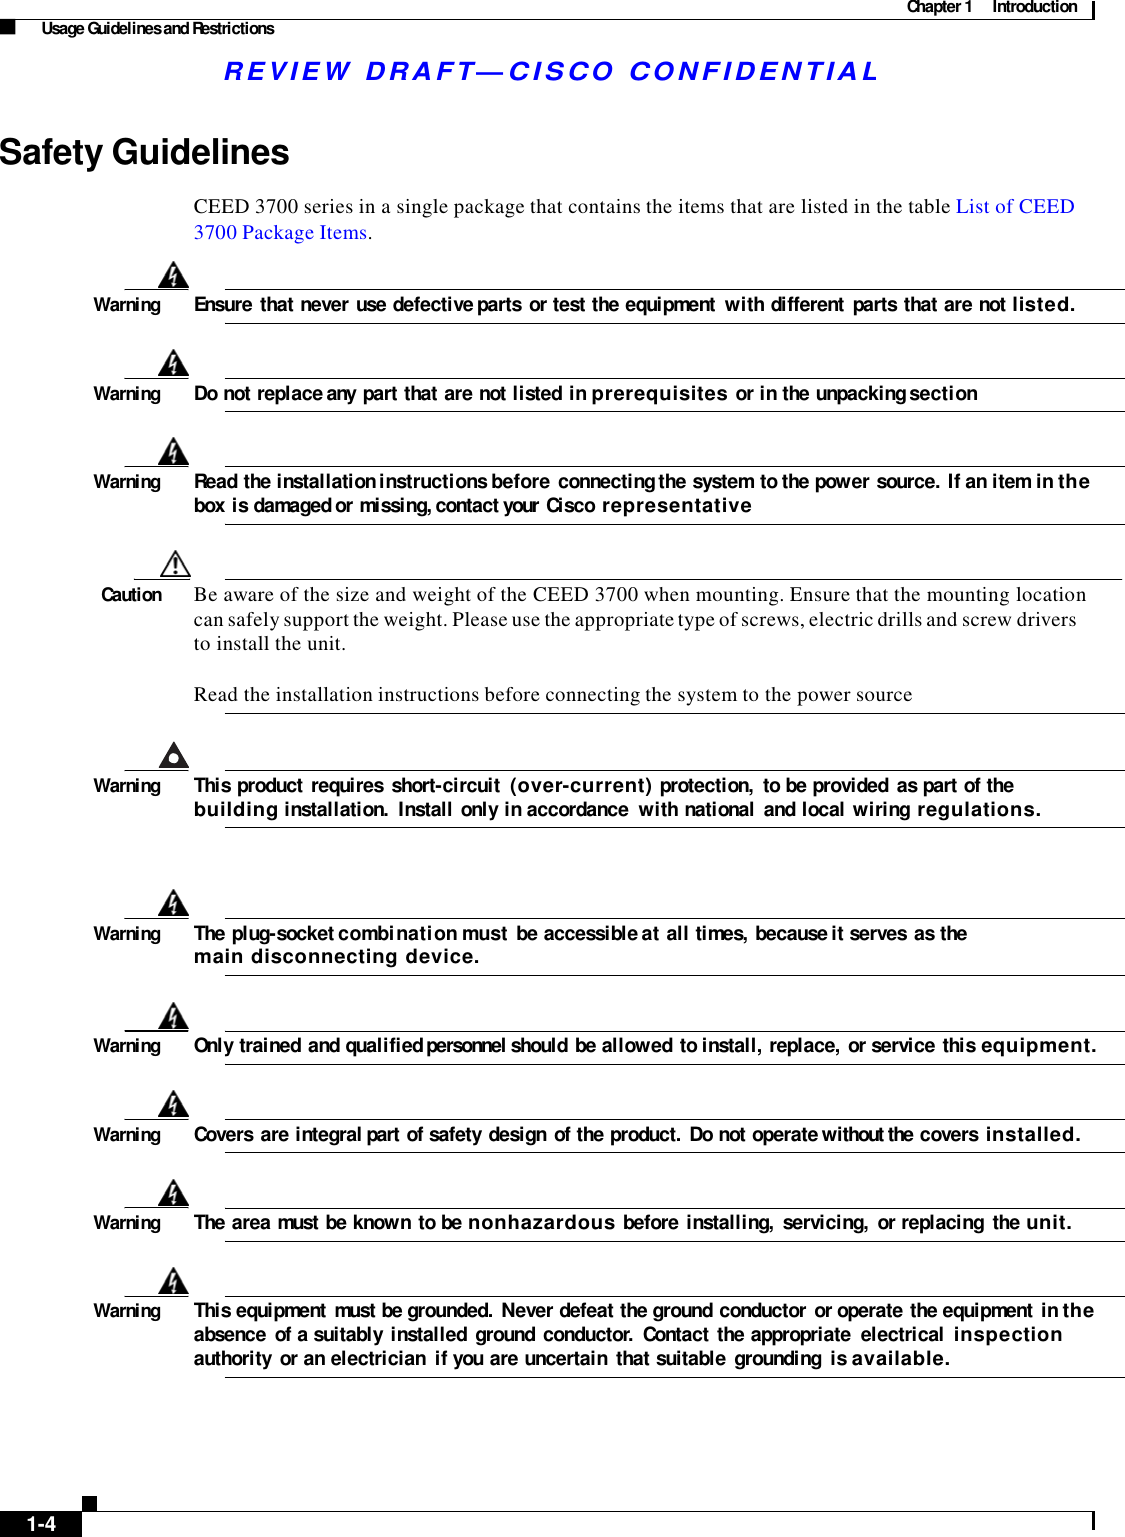 Chapter 1  Introduction Usage Guidelines and Restrictions R E V IE W  DRAFT— CISC O  C O N F ID E NT IA L     Safety Guidelines  CEED 3700 series in a single package that contains the items that are listed in the table List of CEED 3700 Package Items.   Warning  Ensure  that never use defective parts or test the equipment  with different  parts that are not listed.    Warning  Do not replace any part that are not listed in prerequisites or in the unpacking section    Warning  Read the installation instructions before connecting the system  to the power source. If an item in the box is damaged or missing, contact your Cisco representative    Caution  Be aware of the size and weight of the CEED 3700 when mounting. Ensure that the mounting location can safely support the weight. Please use the appropriate type of screws, electric drills and screw drivers to install the unit.  Read the installation instructions before connecting the system to the power source    Warning  This product  requires  short-circuit  (over-current) protection,  to be provided  as part of the building installation.  Install  only in accordance  with national  and local wiring regulations.      Warning  The plug-socket combination must be accessible at all times, because it serves  as the main disconnecting device.    Warning  Only trained and qualified personnel should be allowed  to install, replace,  or service  this equipment.    Warning  Covers  are integral part of safety  design  of the product.  Do not operate without the covers installed.    Warning  The area must be known  to be nonhazardous before installing,  servicing,  or replacing  the unit.    Warning  This equipment  must be grounded.  Never defeat the ground conductor  or operate the equipment  in the absence  of a suitably  installed  ground  conductor.  Contact  the appropriate  electrical  inspection authority  or an electrician  if you are uncertain  that suitable  grounding  is available.          1-4    